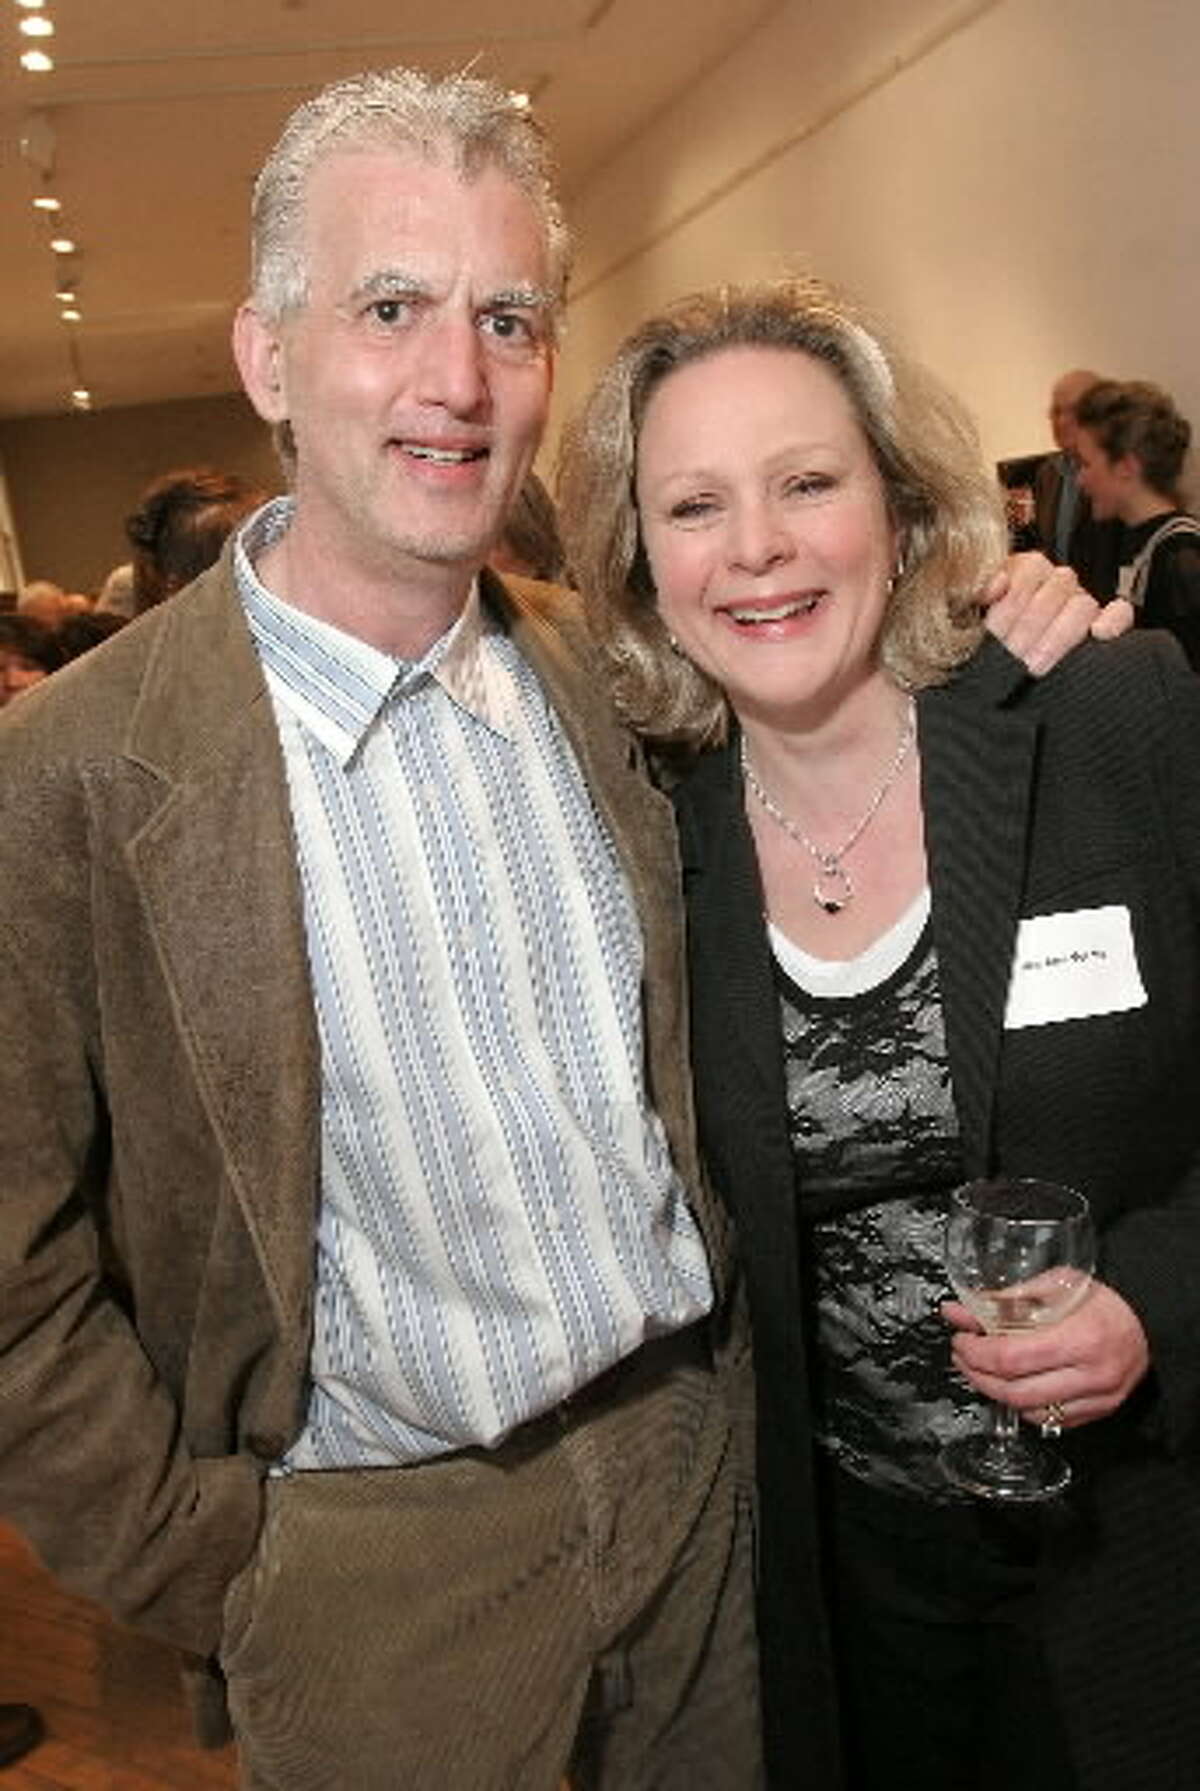 (Photo by Joe Putrock/Special to the Times Union) - PYX 106 radio personality, Bob 'the Wolf' Wolf(left), and his wife Dee Ann Veeder(right), at the Hudson Opera house during the cocktail hour preceeding dinner during the Movable Feast. While Wolf said with a wink that it was his girlfriend and that he had left his wife home, Veeder assured otherwise. Joe Putrock